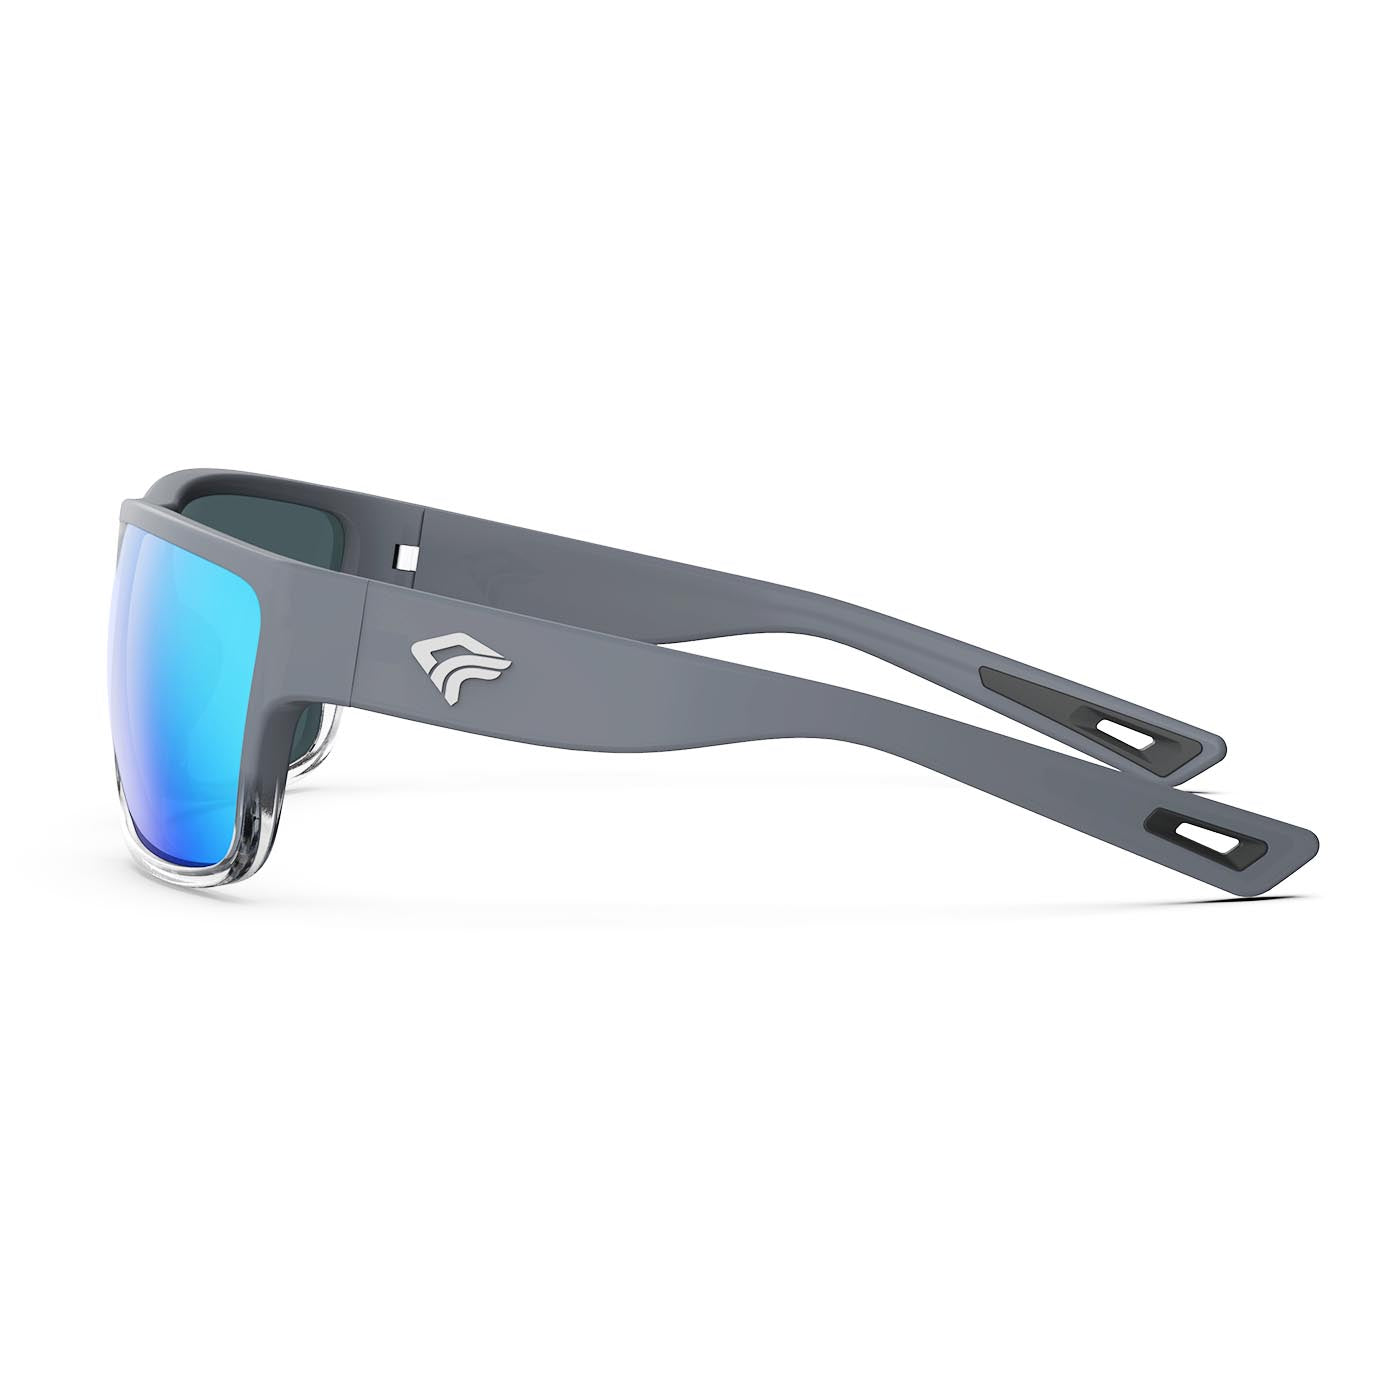 Pure Polarized Sports Golf, - Ideal for Flexible - To Frame Running, Adjustable Half Men and and Warranty - for Ideal Fishing - with Matte and Sunglasses Grey Women Lifetime Transparent Cycling